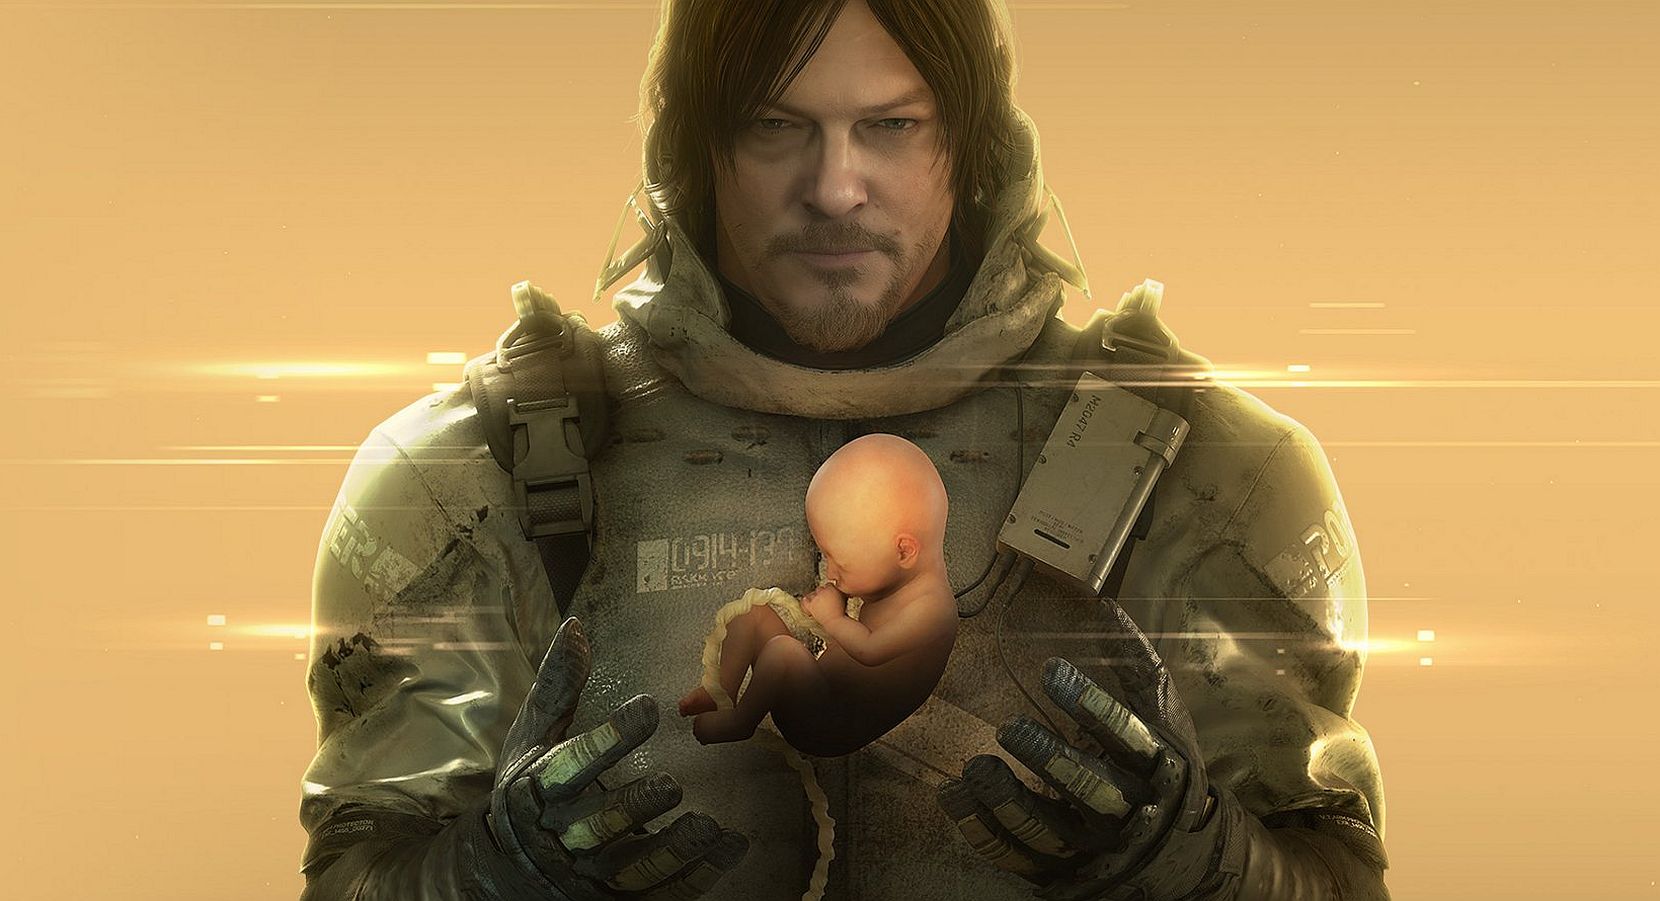 Image for More Death Stranding 2 rumors surface, game is in development under codename "Ocean"